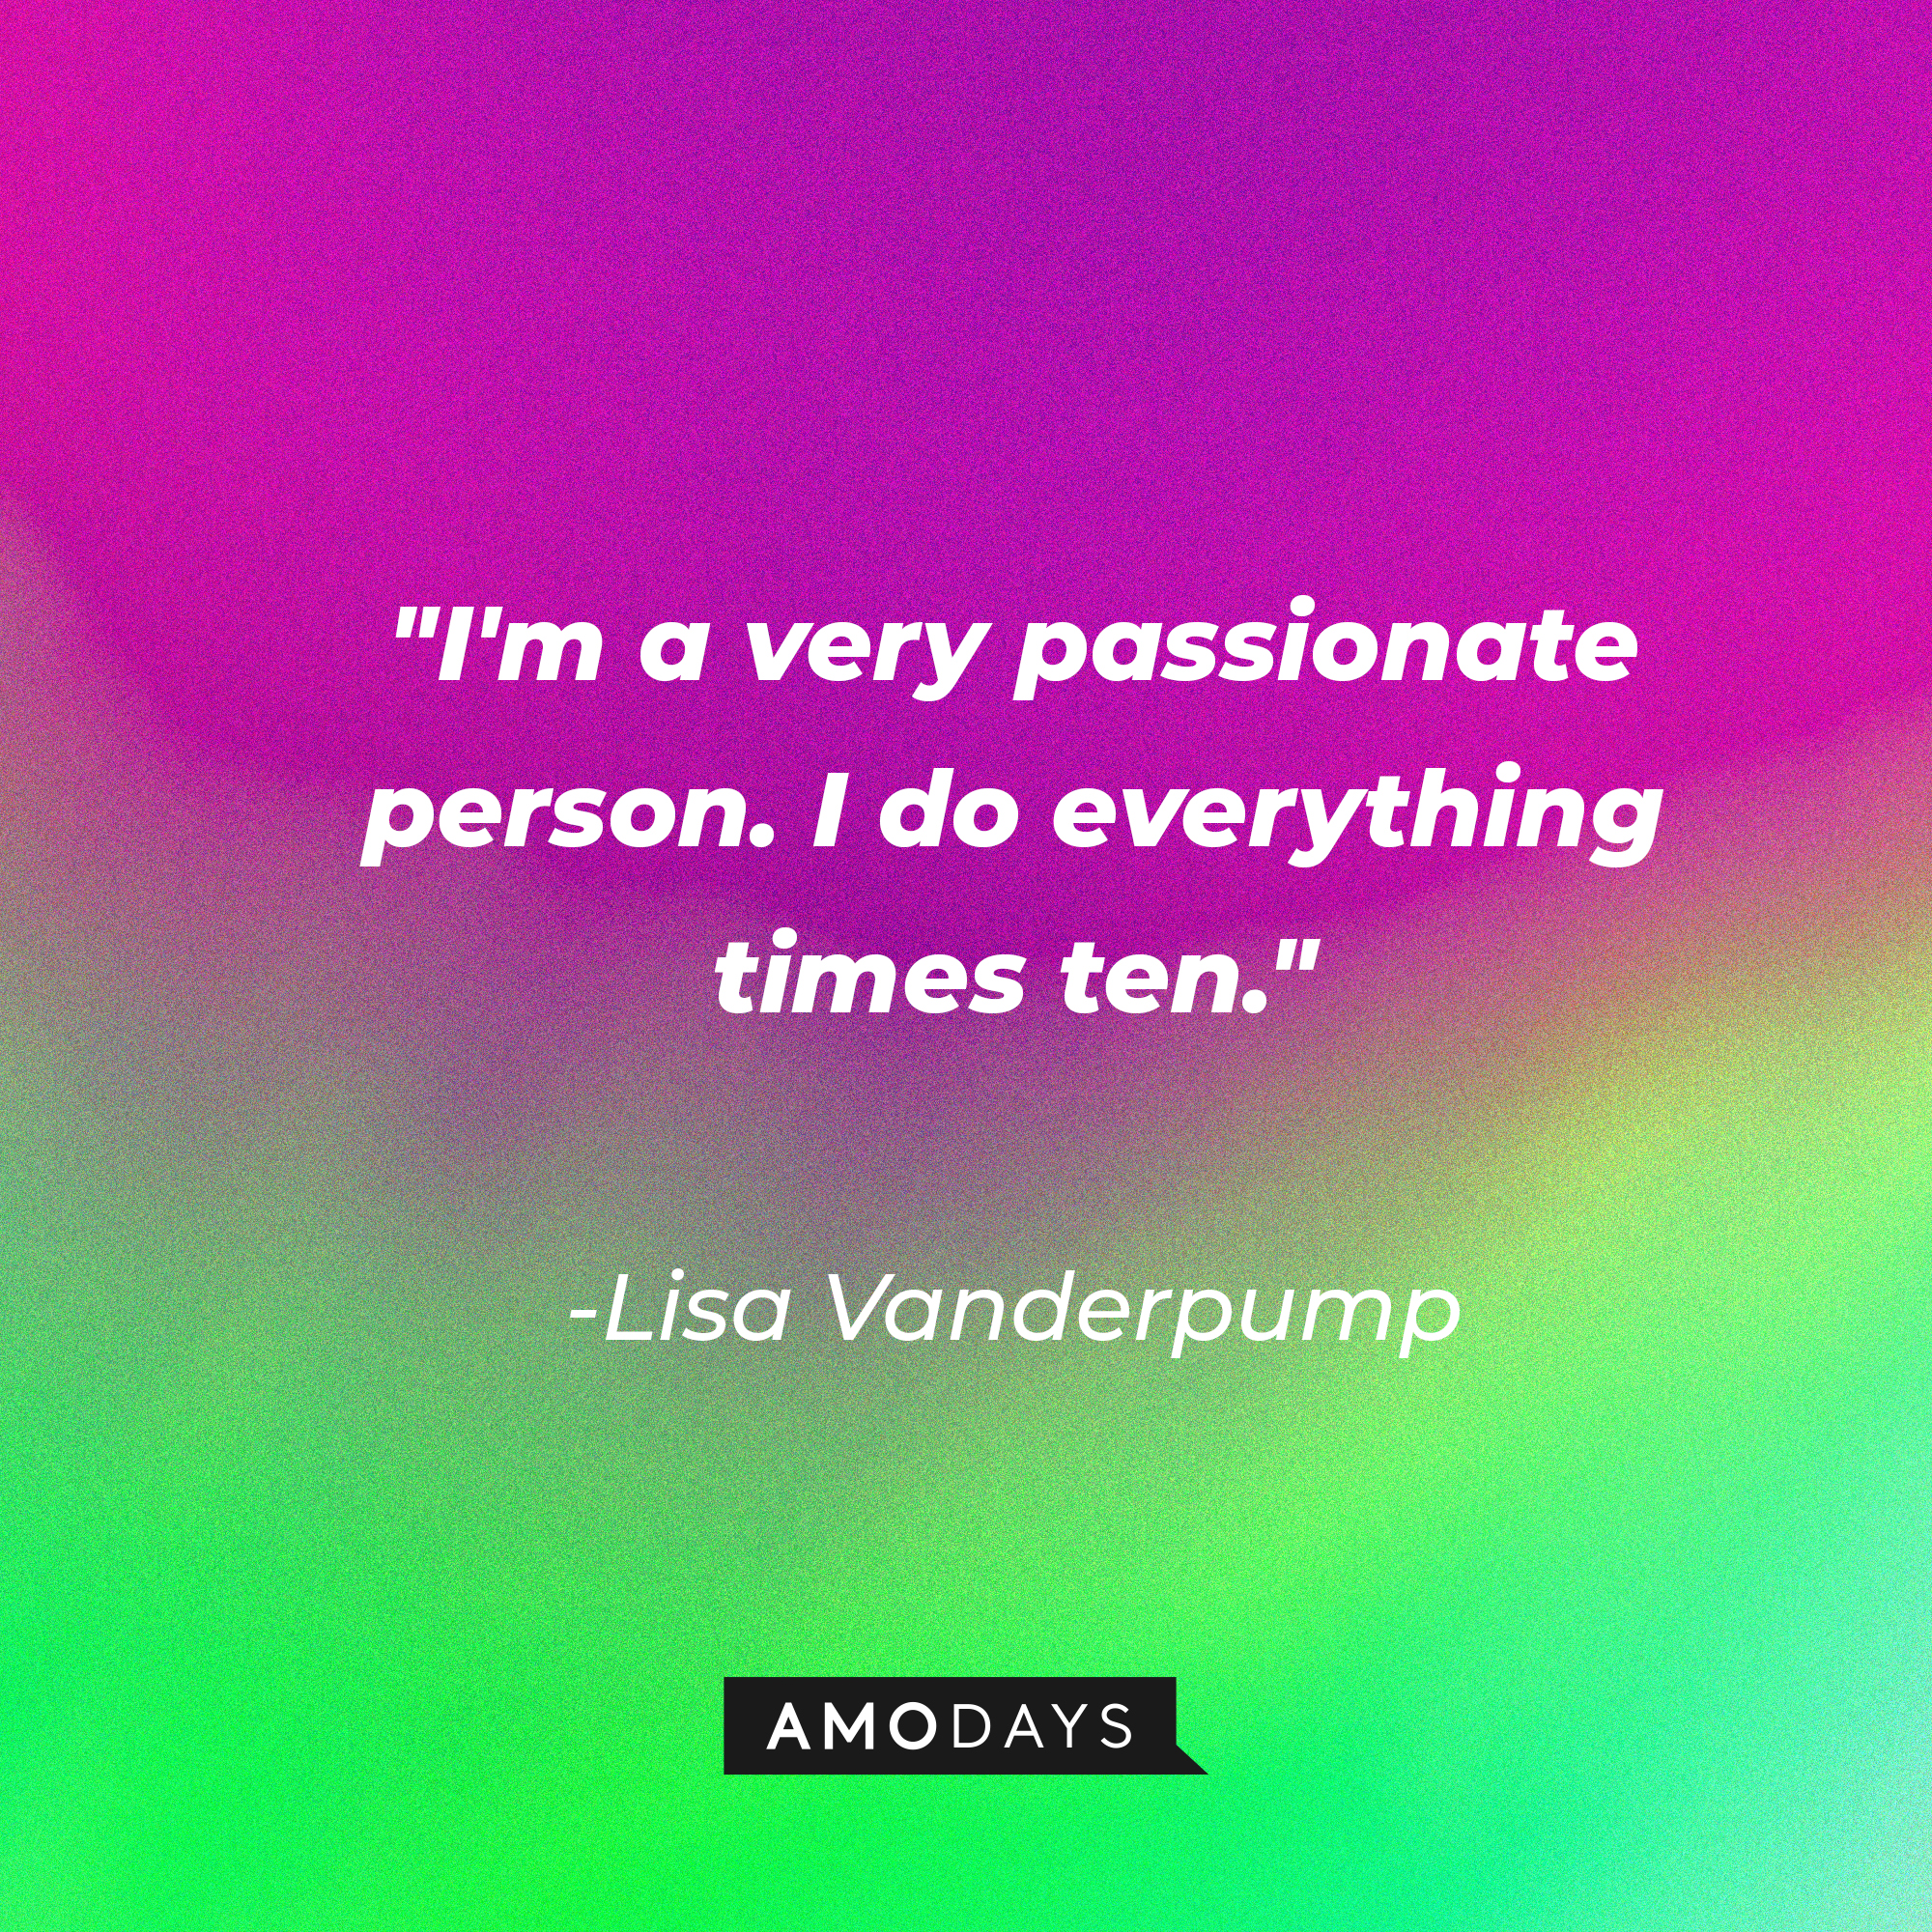 isa Vanderpump’s quote: “I'm a very passionate person. I do everything times ten.” — | Source: AmoDays